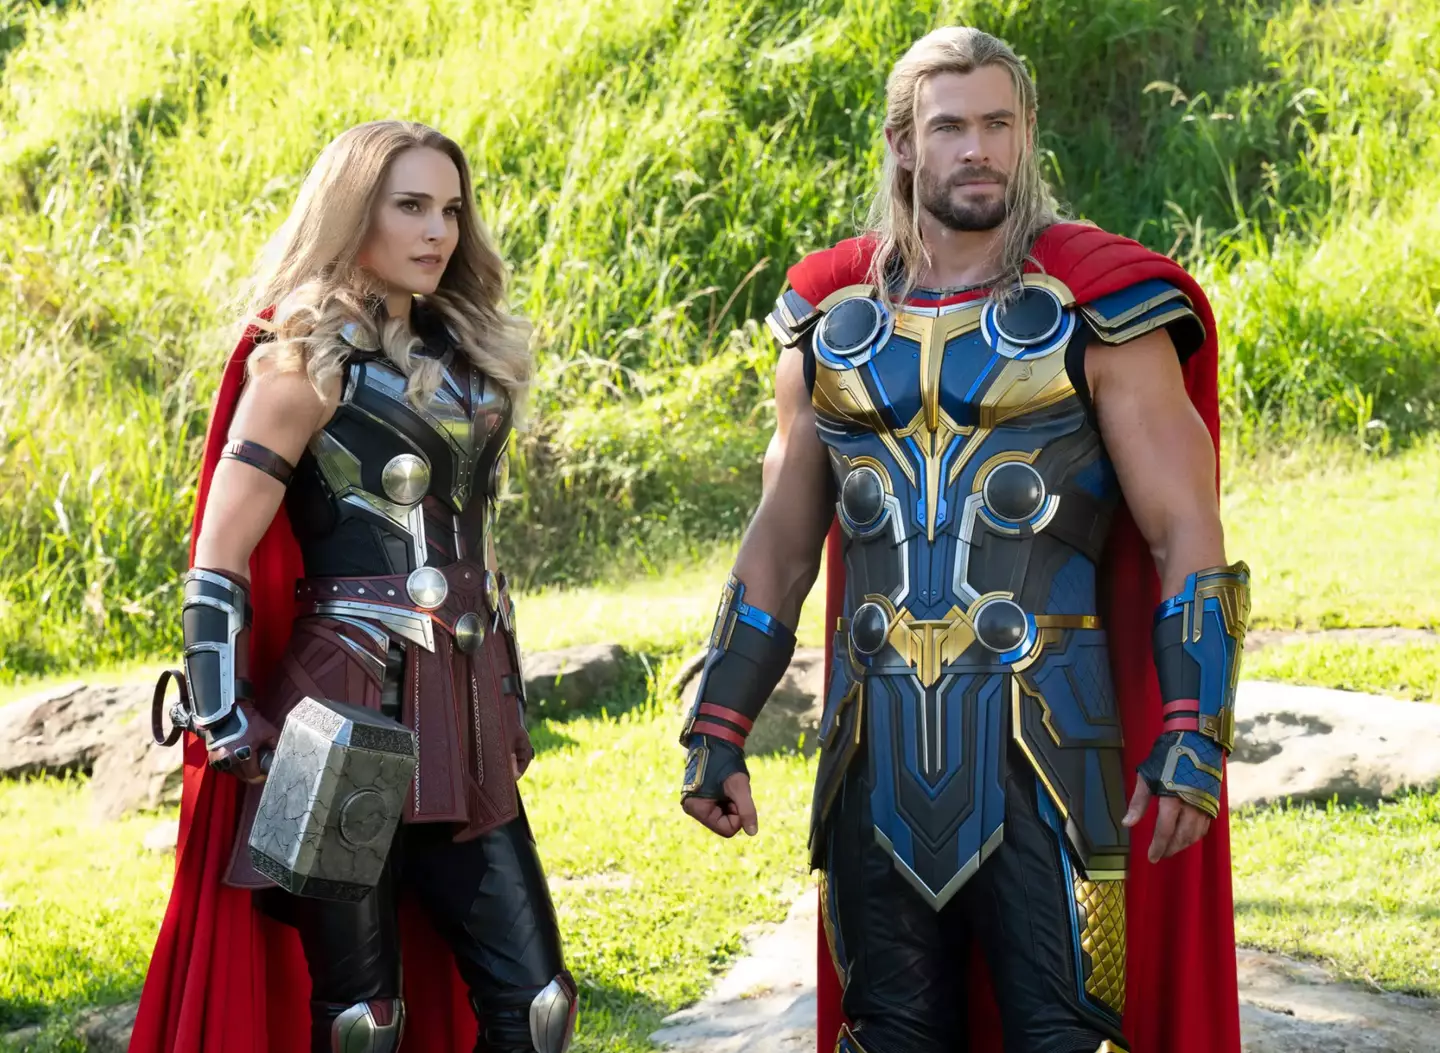 Thor: Love and Thunder premiered in July 2022.